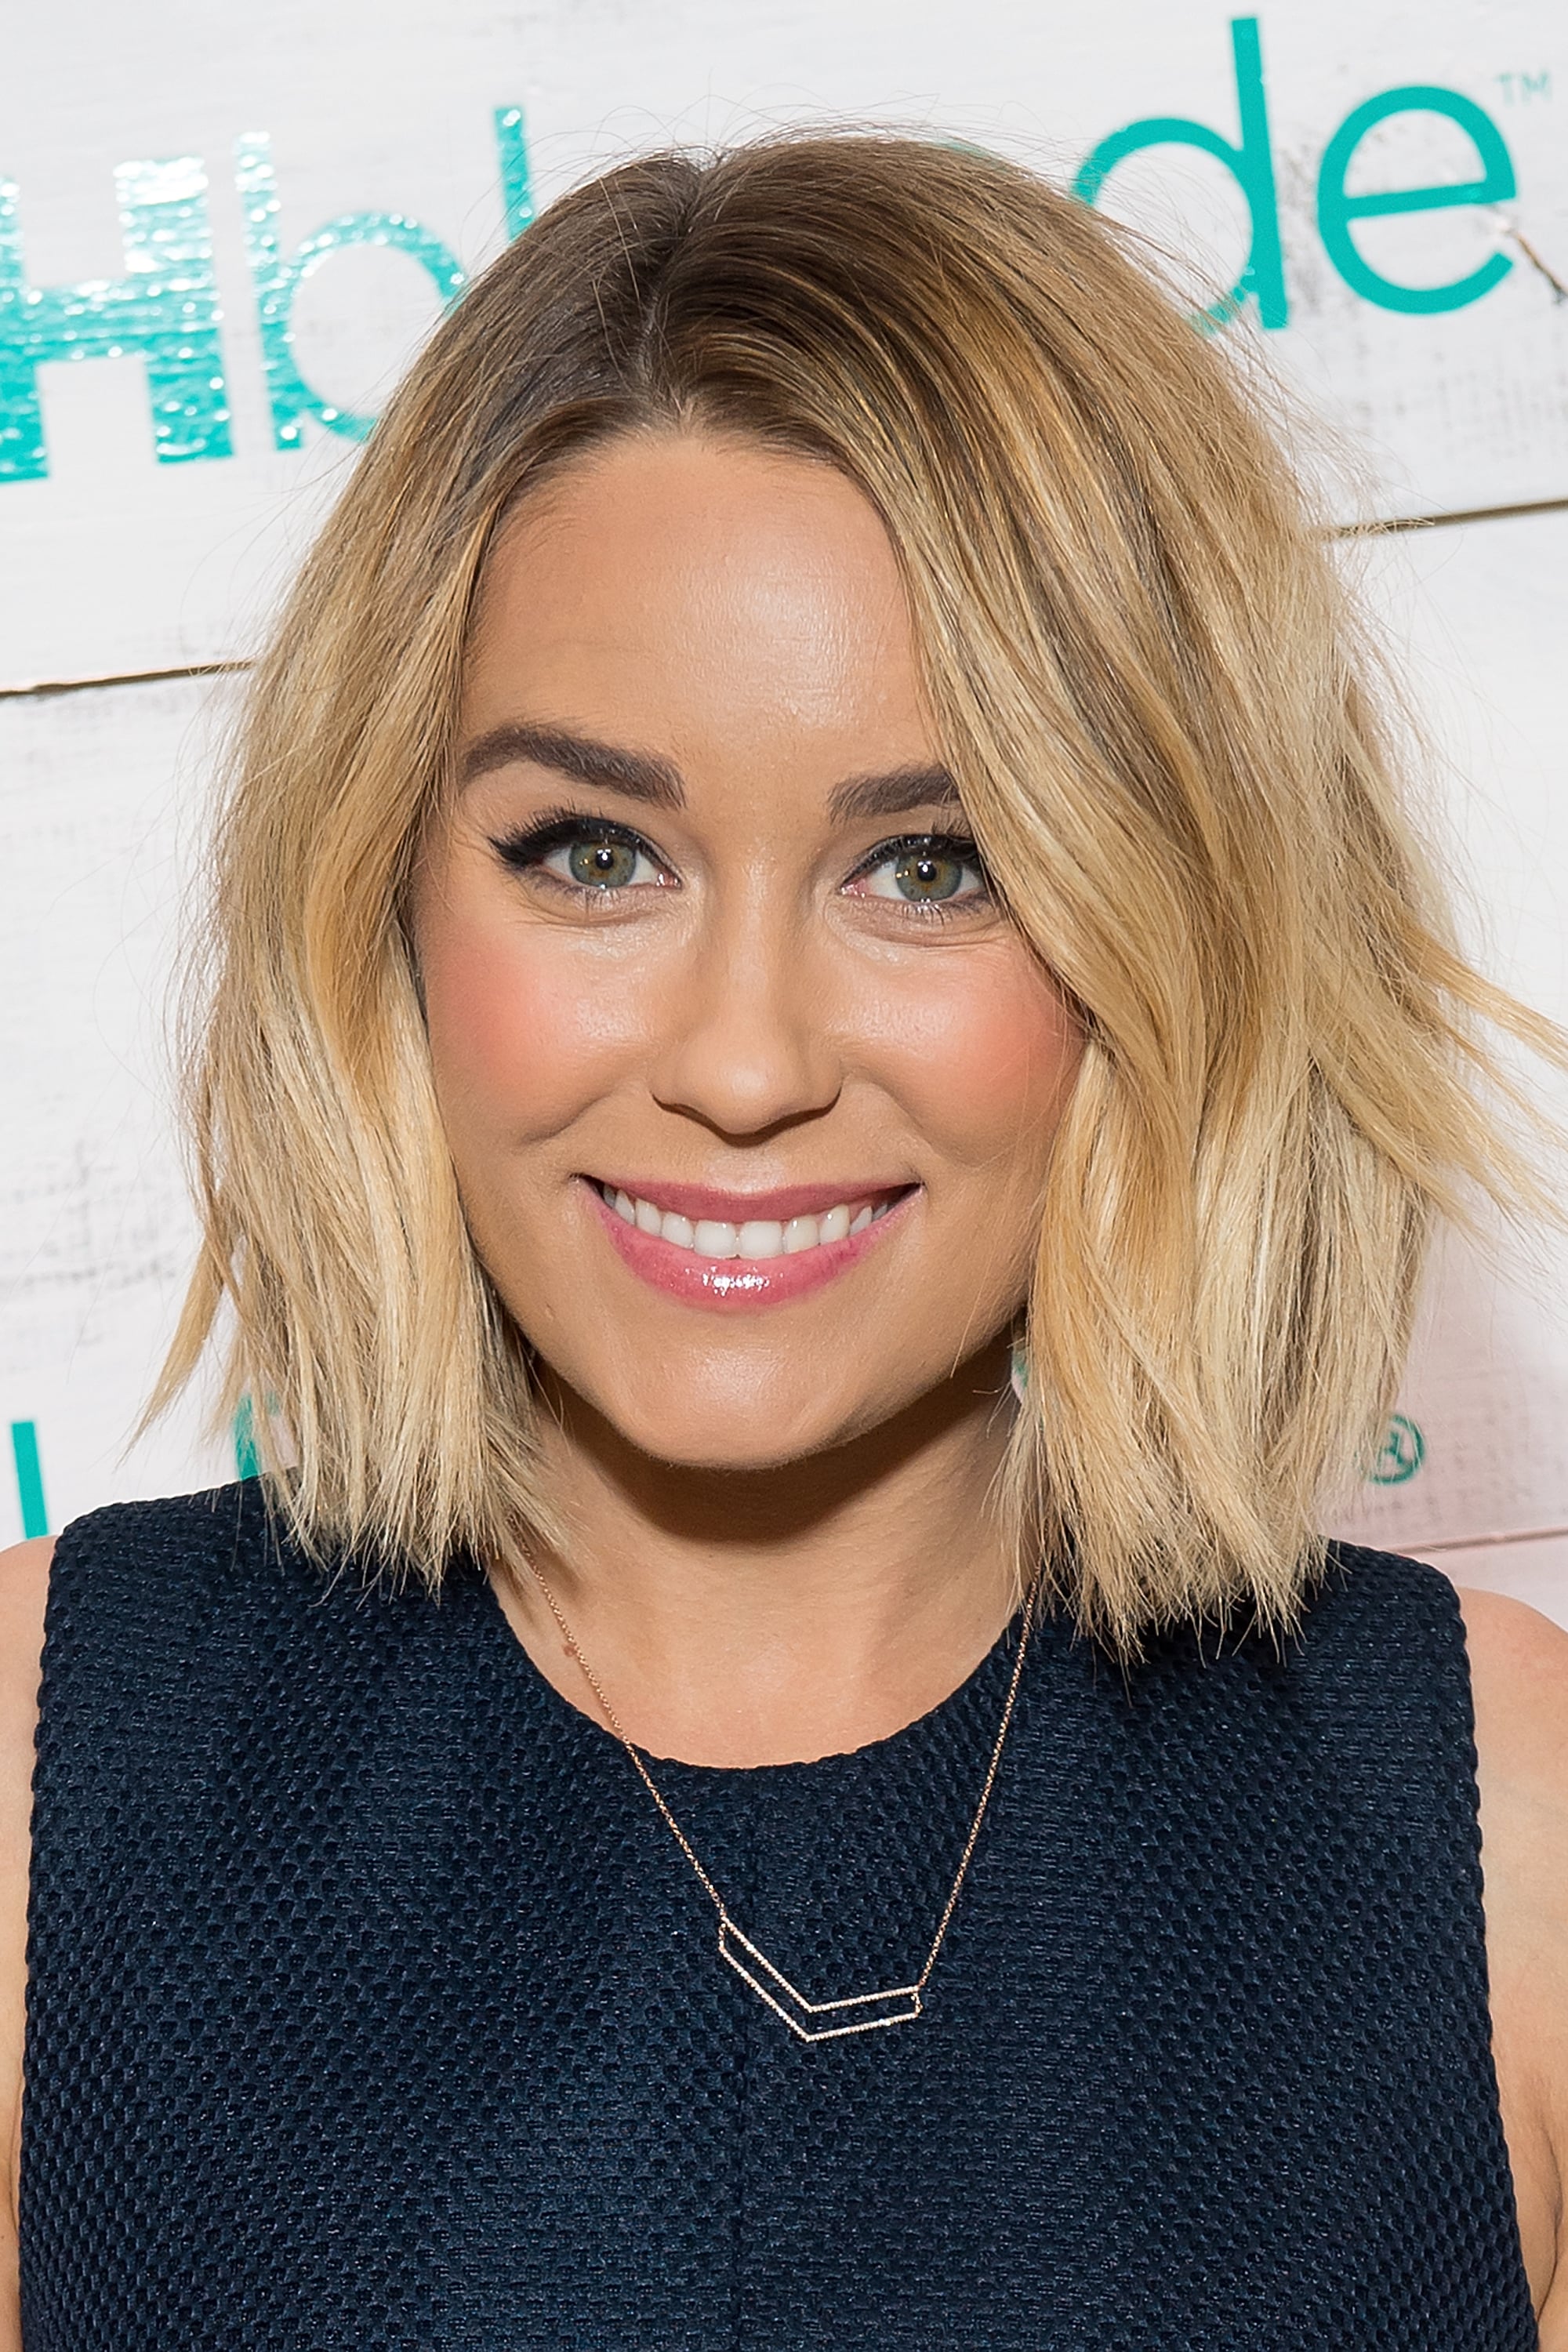 Lauren Conrad Admits Her 'Life Is a Bit of a Mess' After Becoming